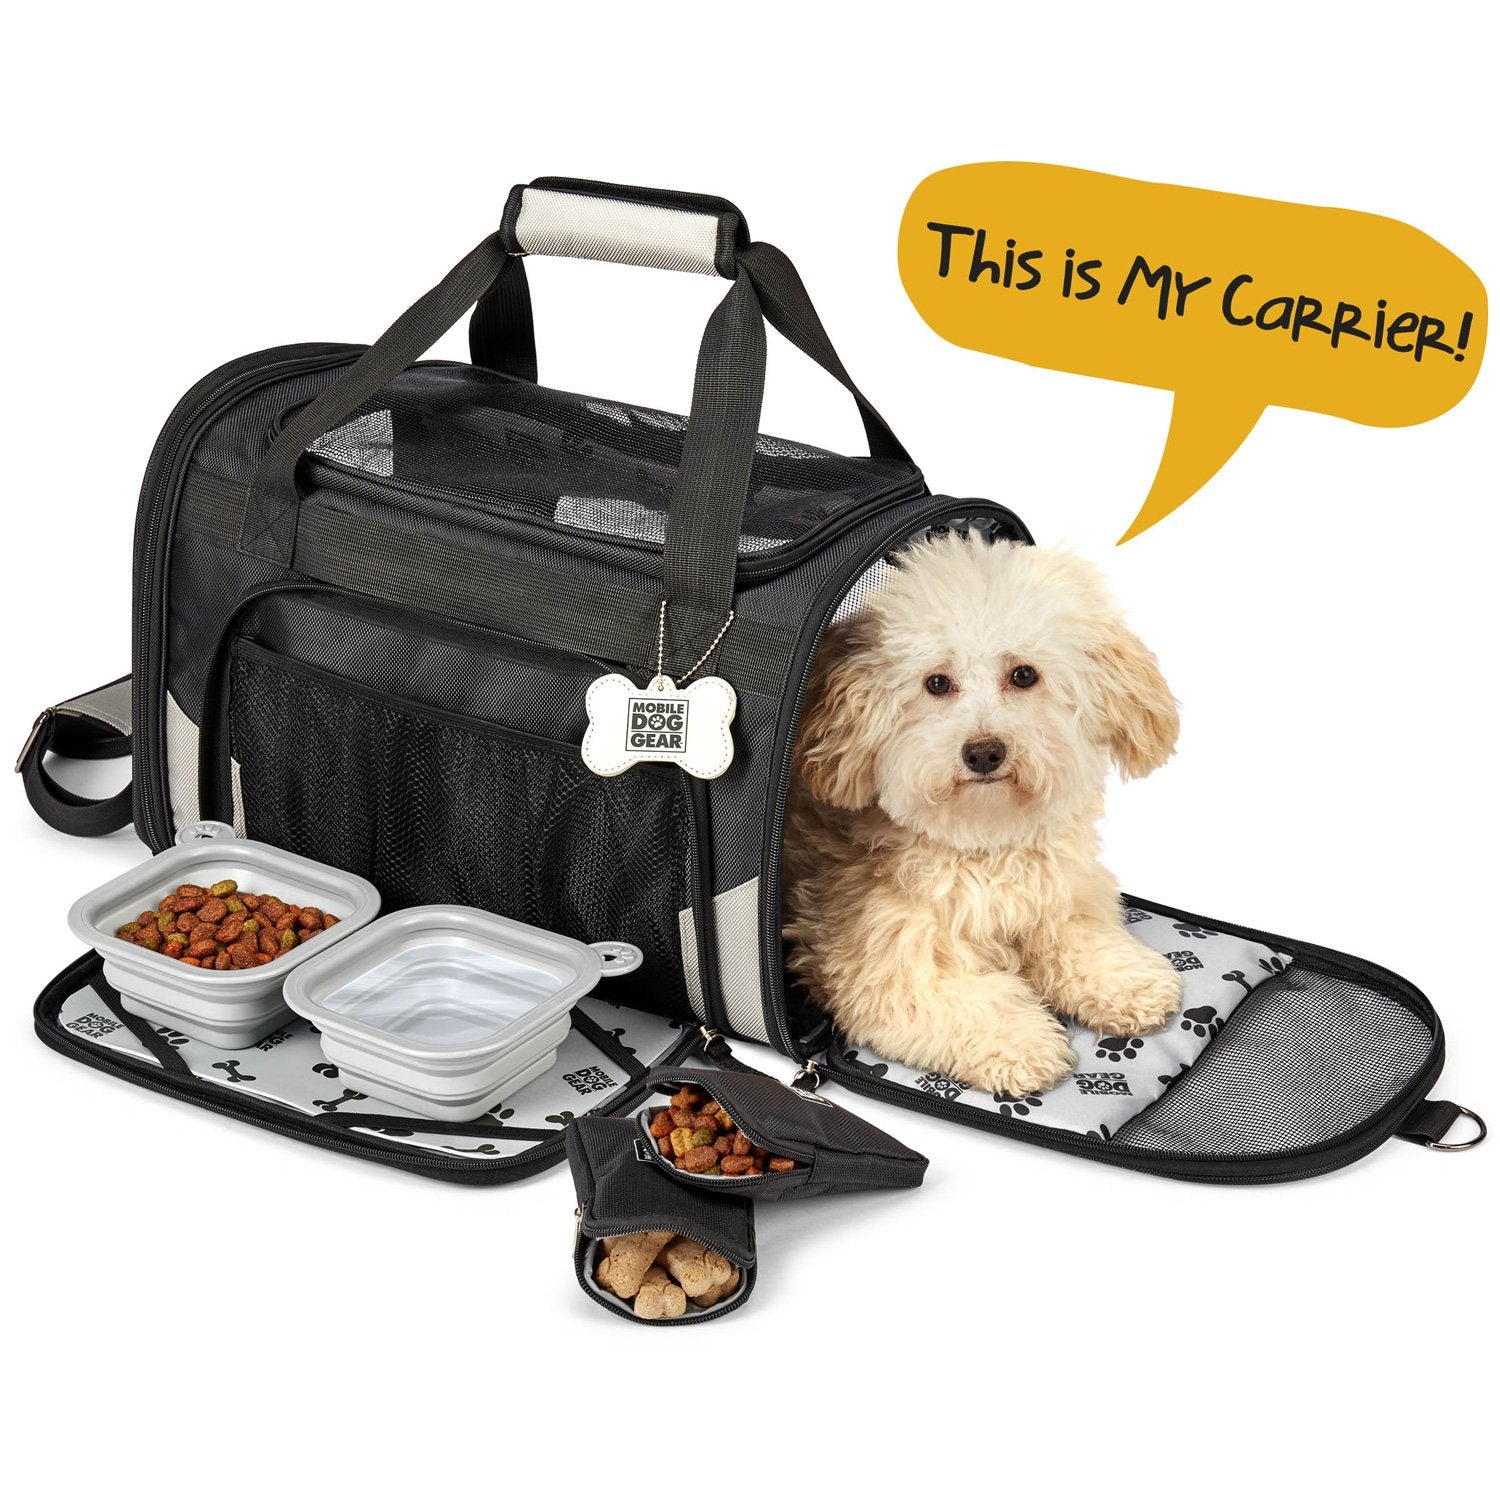 Overland LLC Mobile Dog Gear Pet Carrier Plus in Black, Size Small